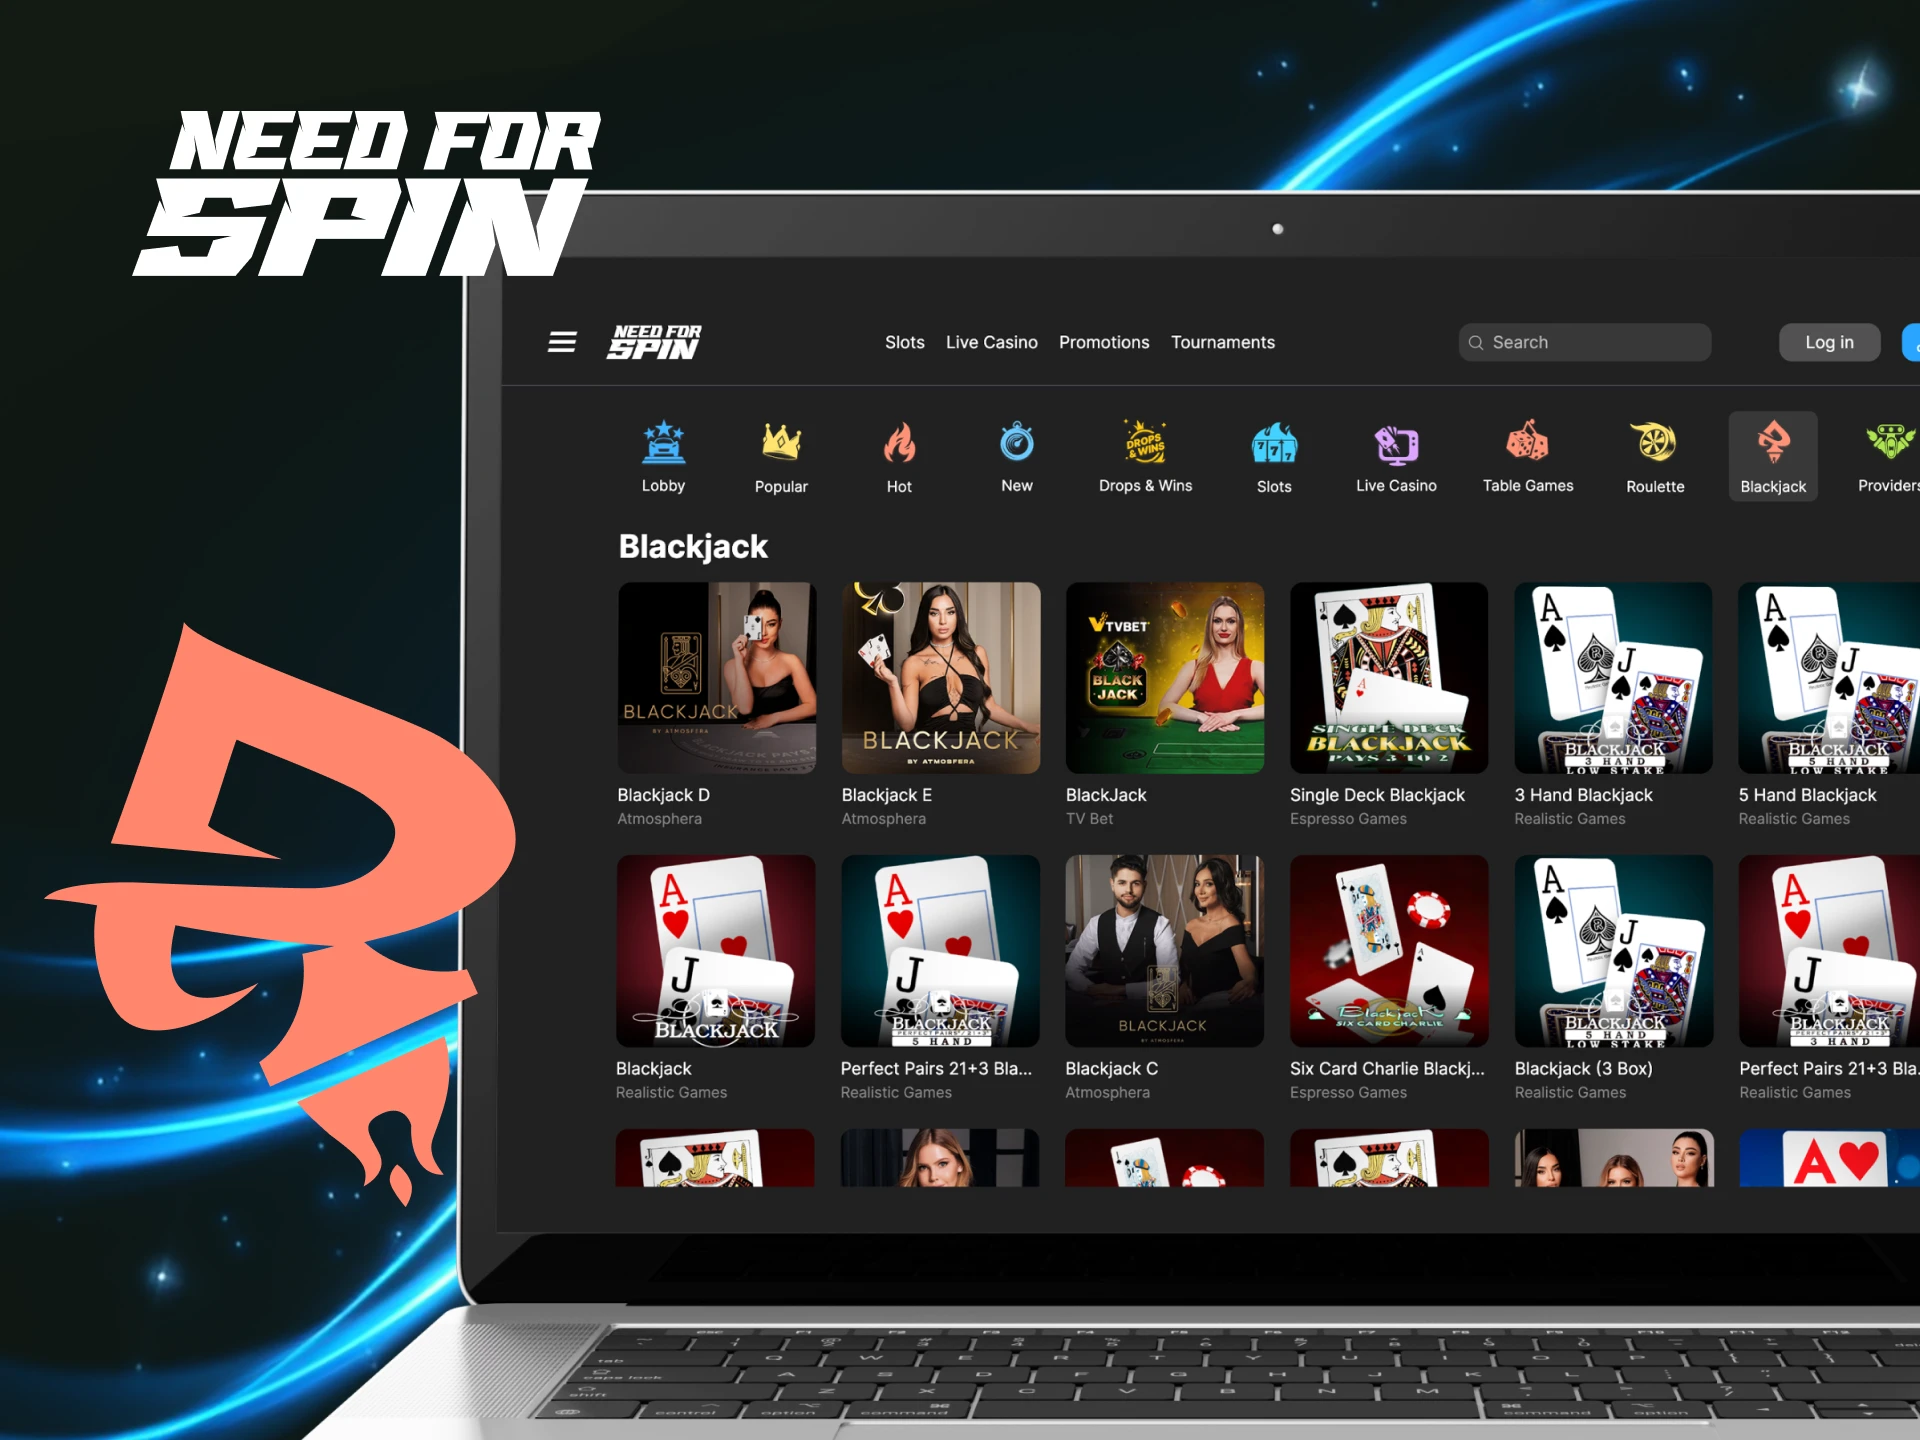 What blackjack games are available on the Need For Spin online casino website.